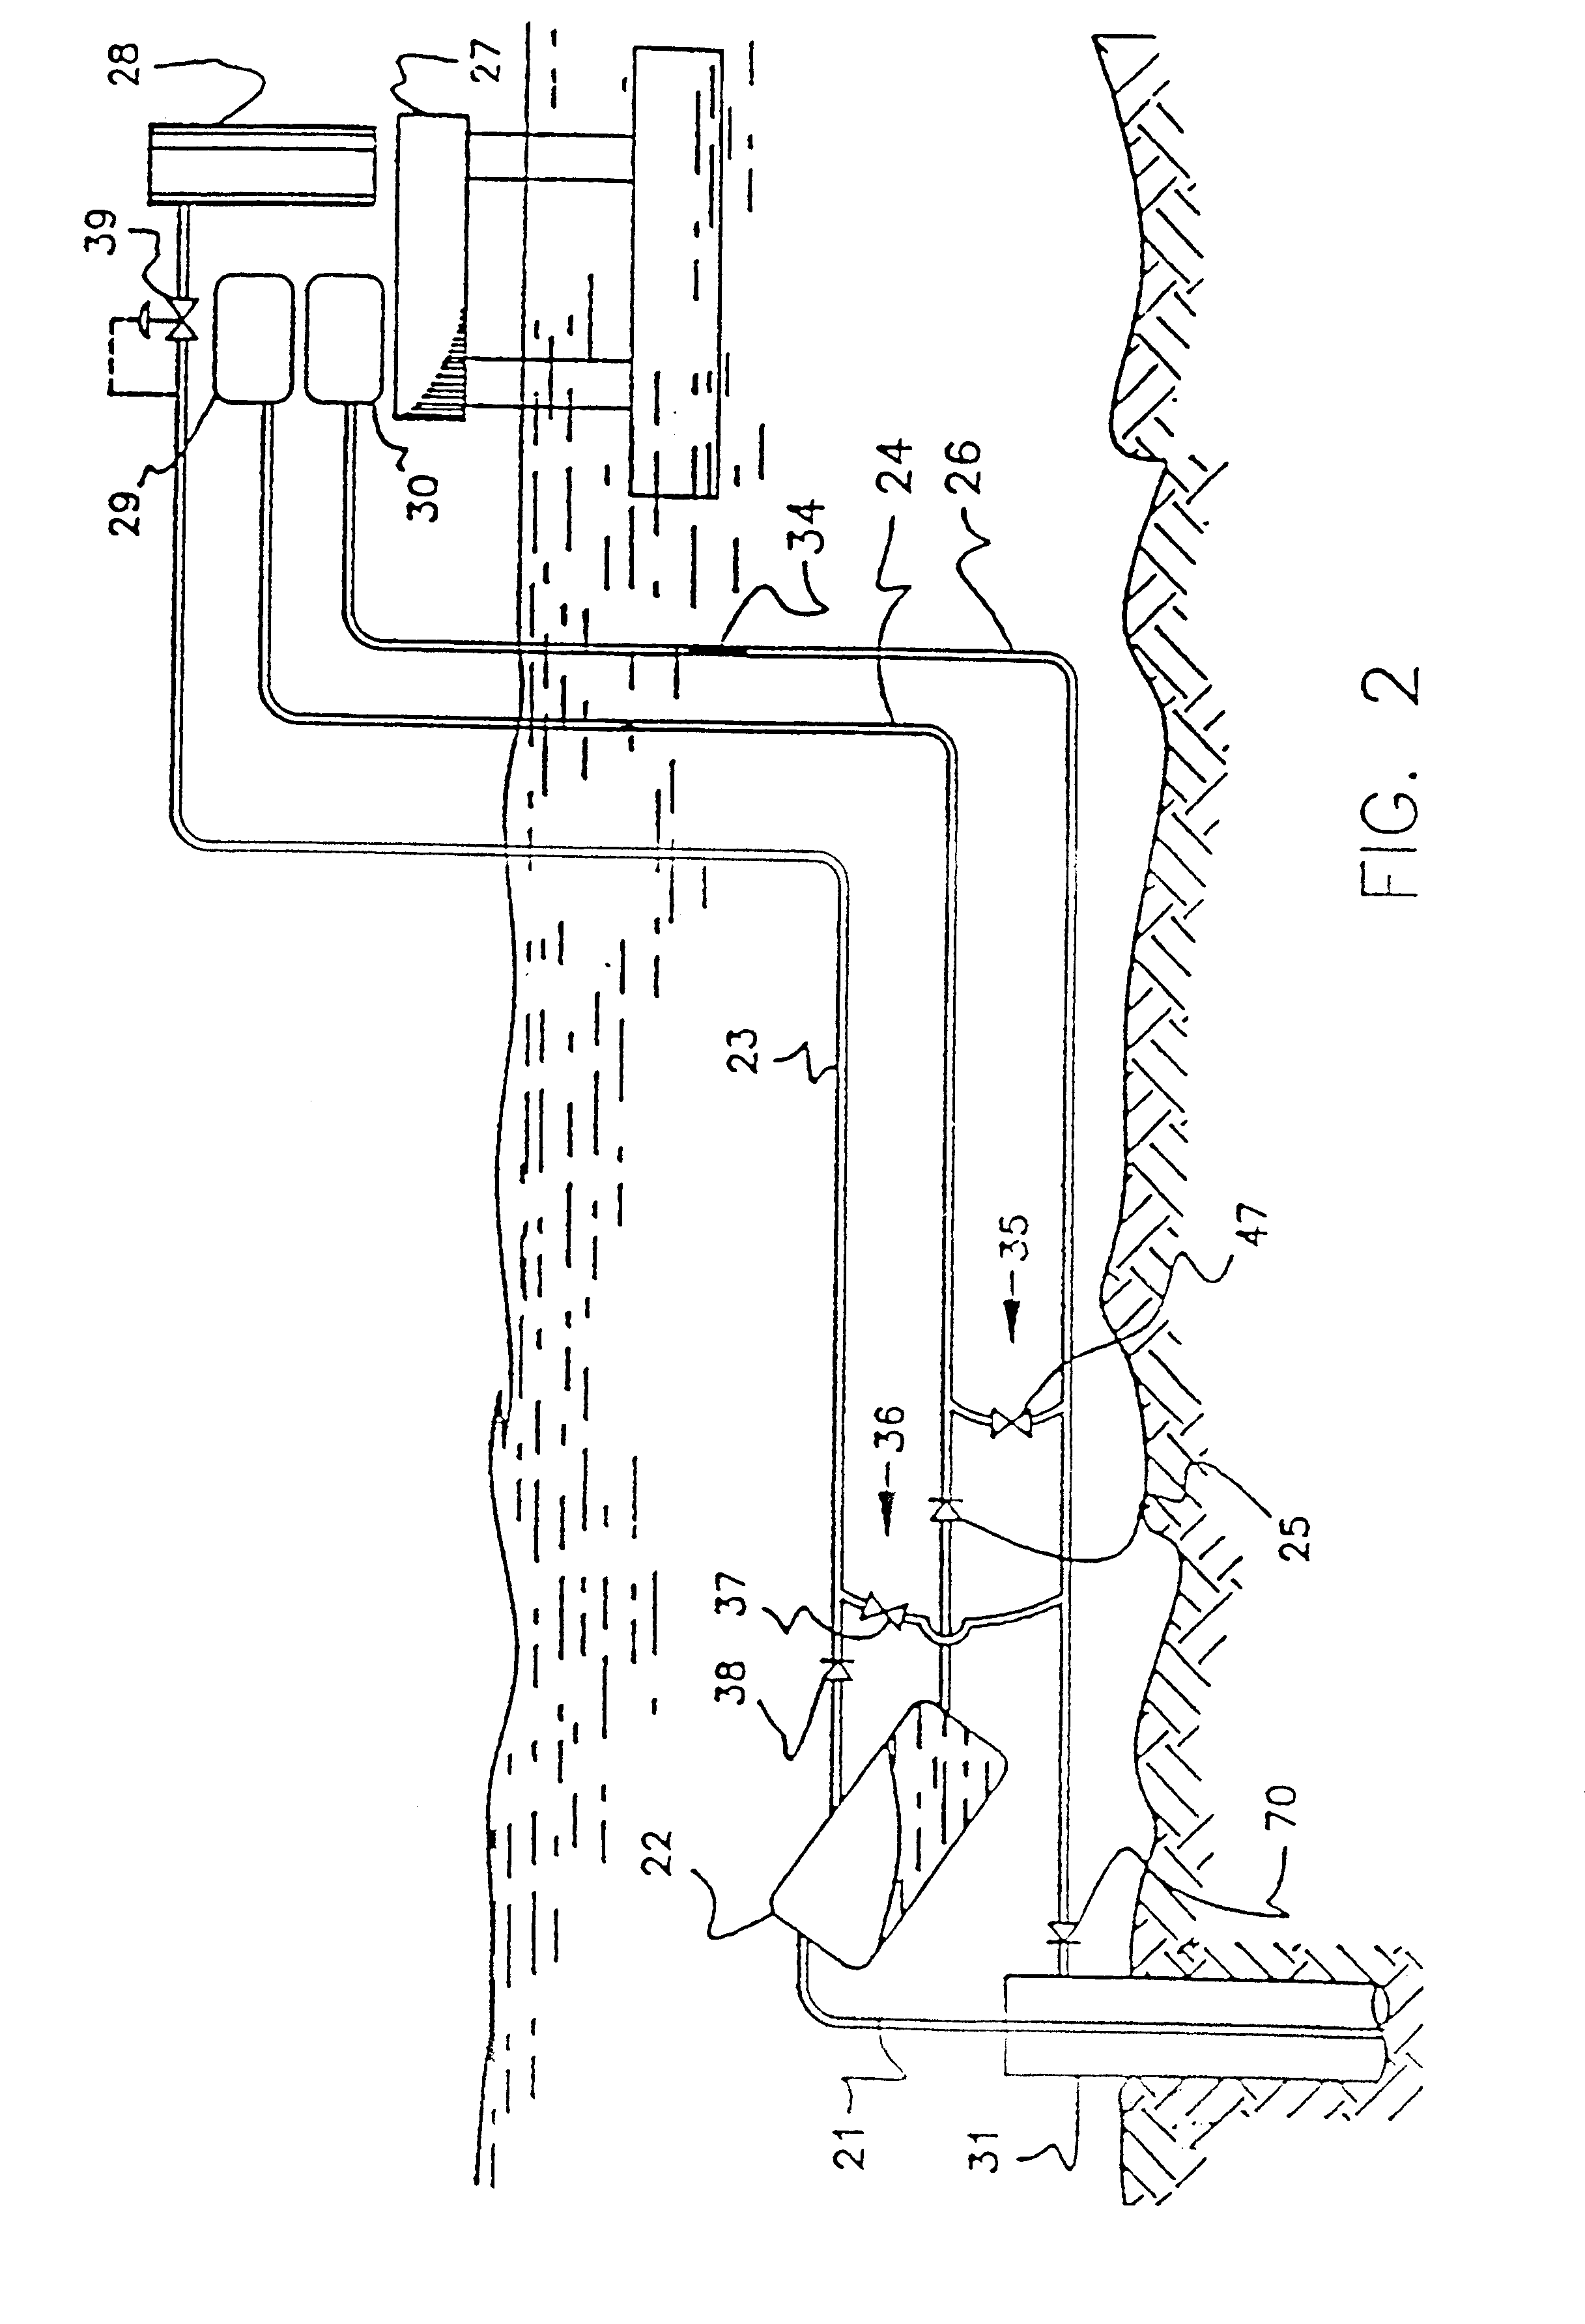 Method and equipment for offshore oil production with primary gas separation and flow using the injection of high pressure gas